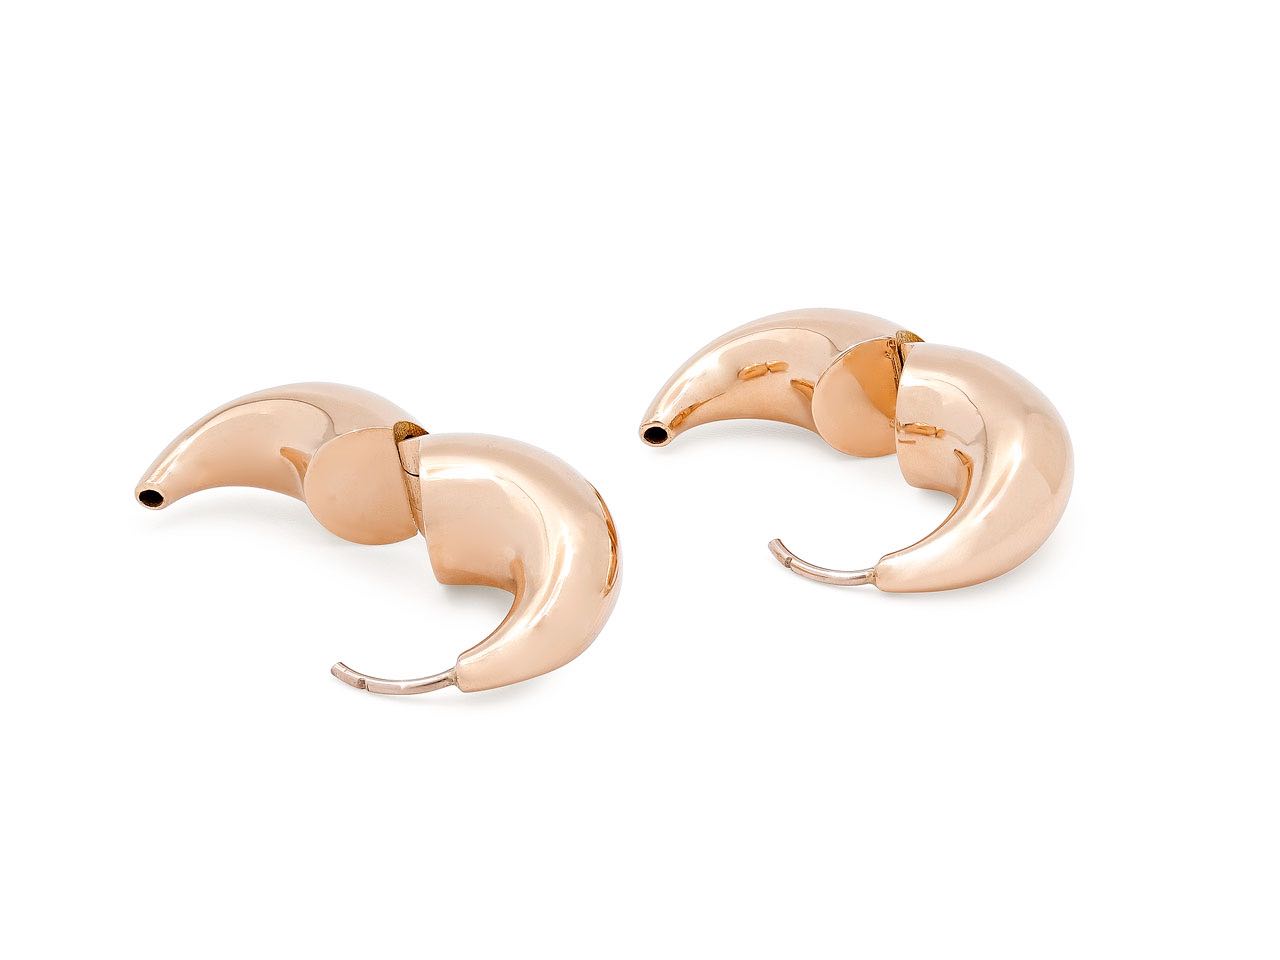 Crescent Hoop Earrings in 18K Rose Gold, Small, by Beladora